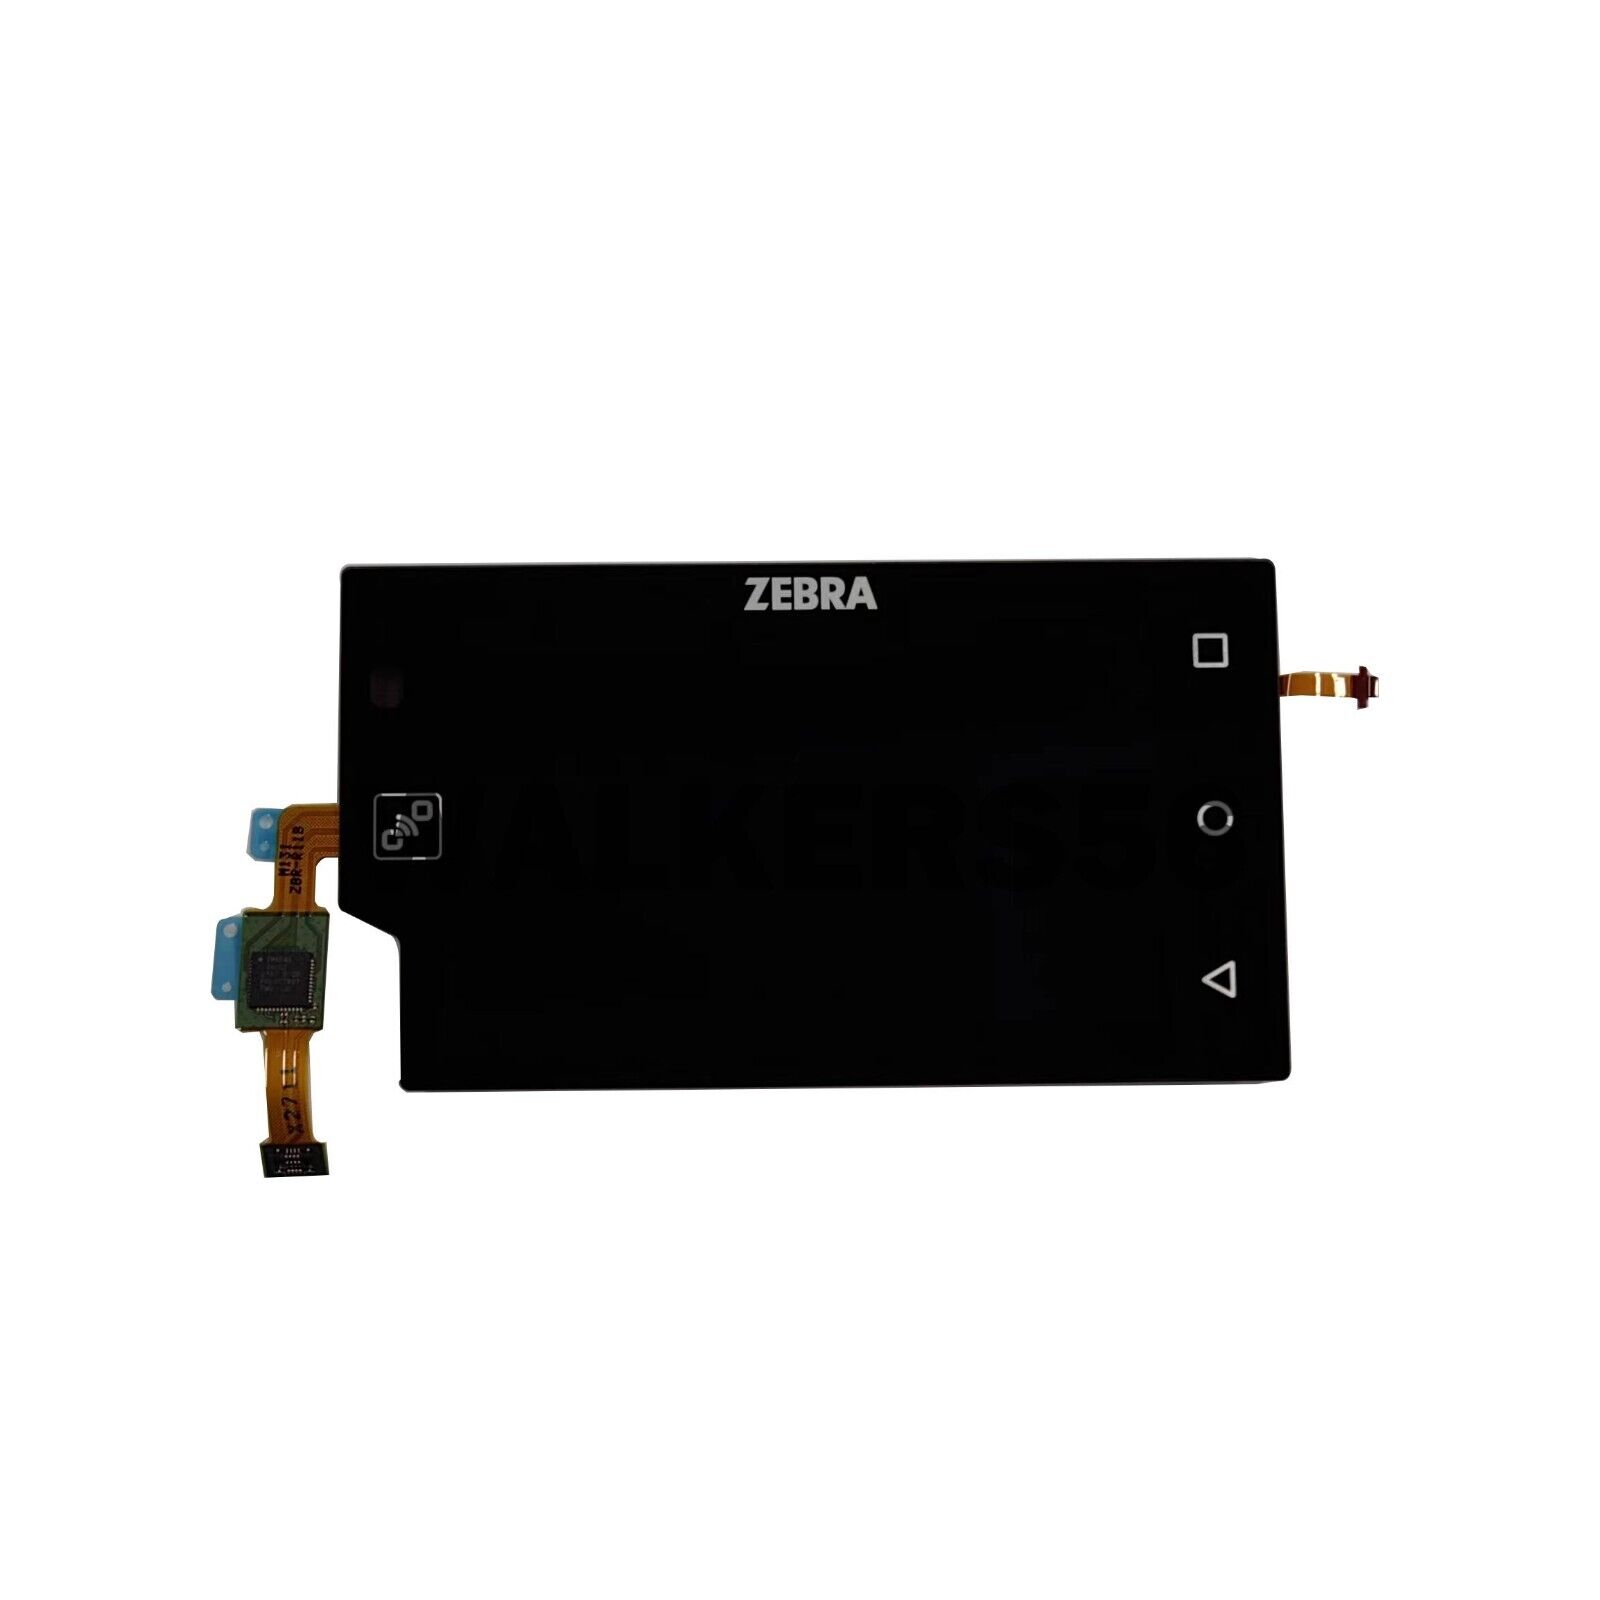 New LCD and Digitizer Assembly Replacement  for Zebra WT6000 WT60A0